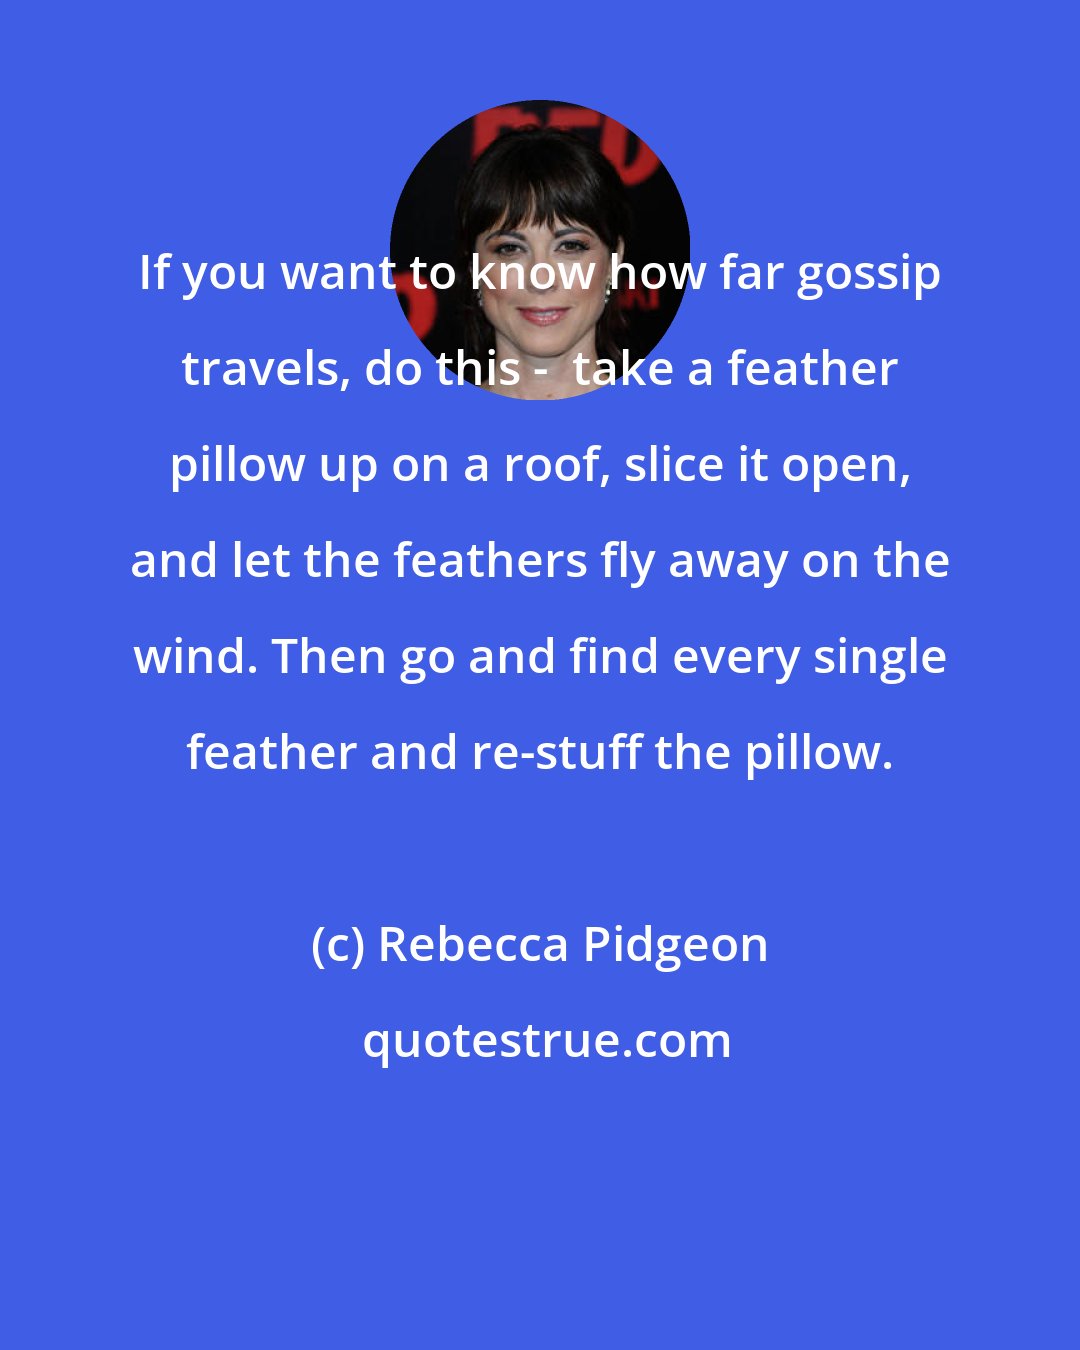 Rebecca Pidgeon: If you want to know how far gossip travels, do this -  take a feather pillow up on a roof, slice it open, and let the feathers fly away on the wind. Then go and find every single feather and re-stuff the pillow.